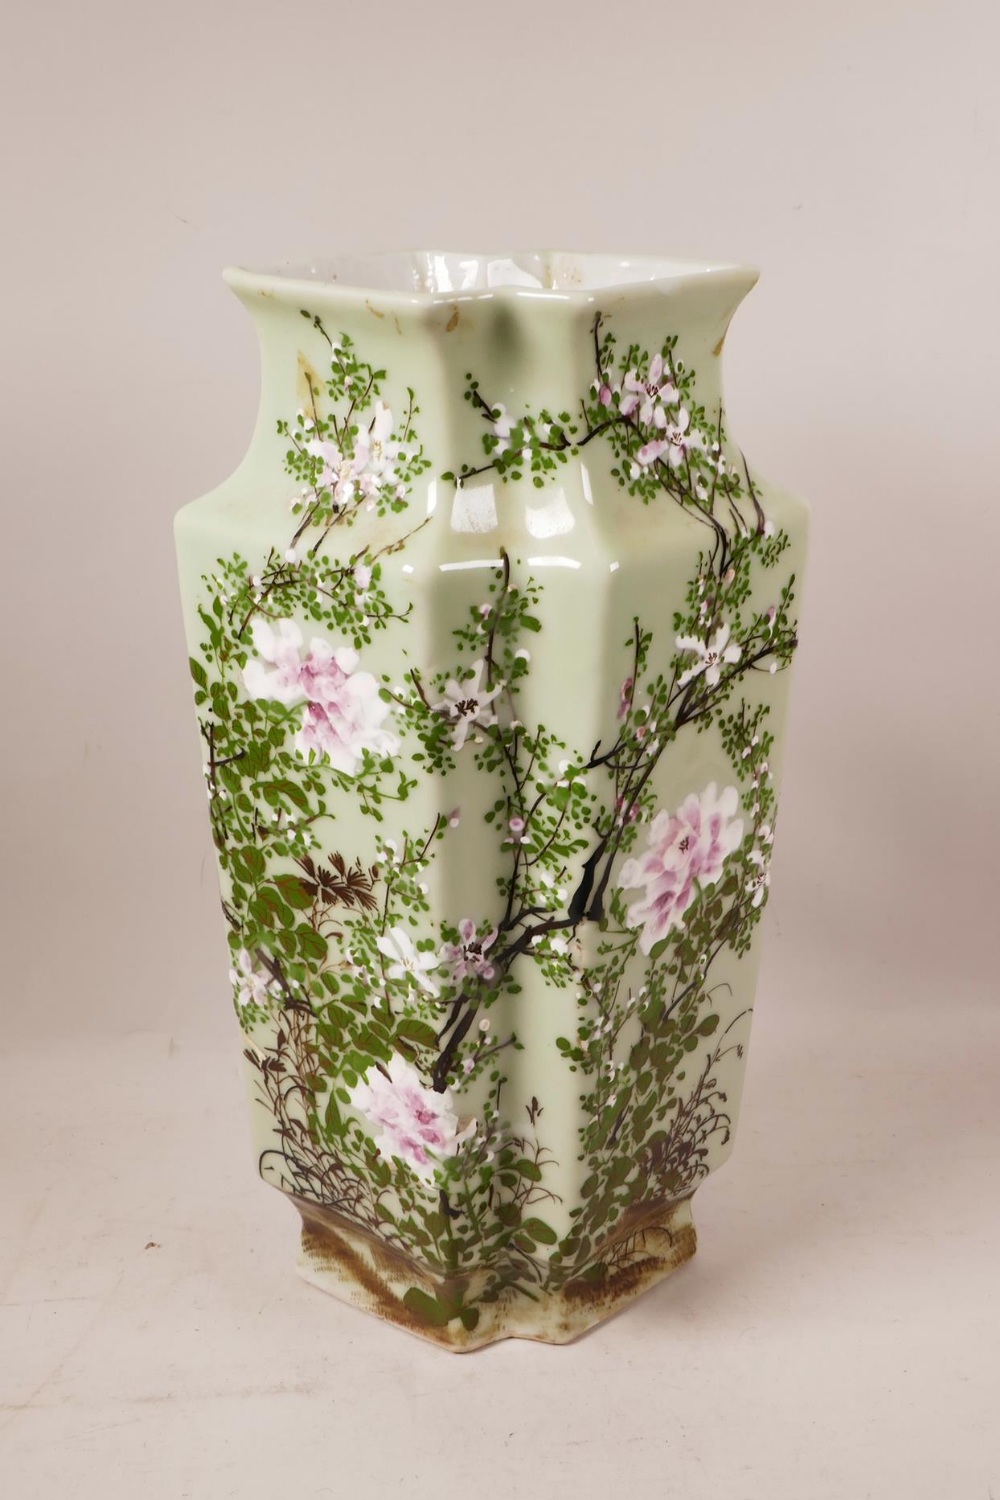 An Oriental celadon glazed vase, with raised enamel decoration of birds and blossom, 16" high